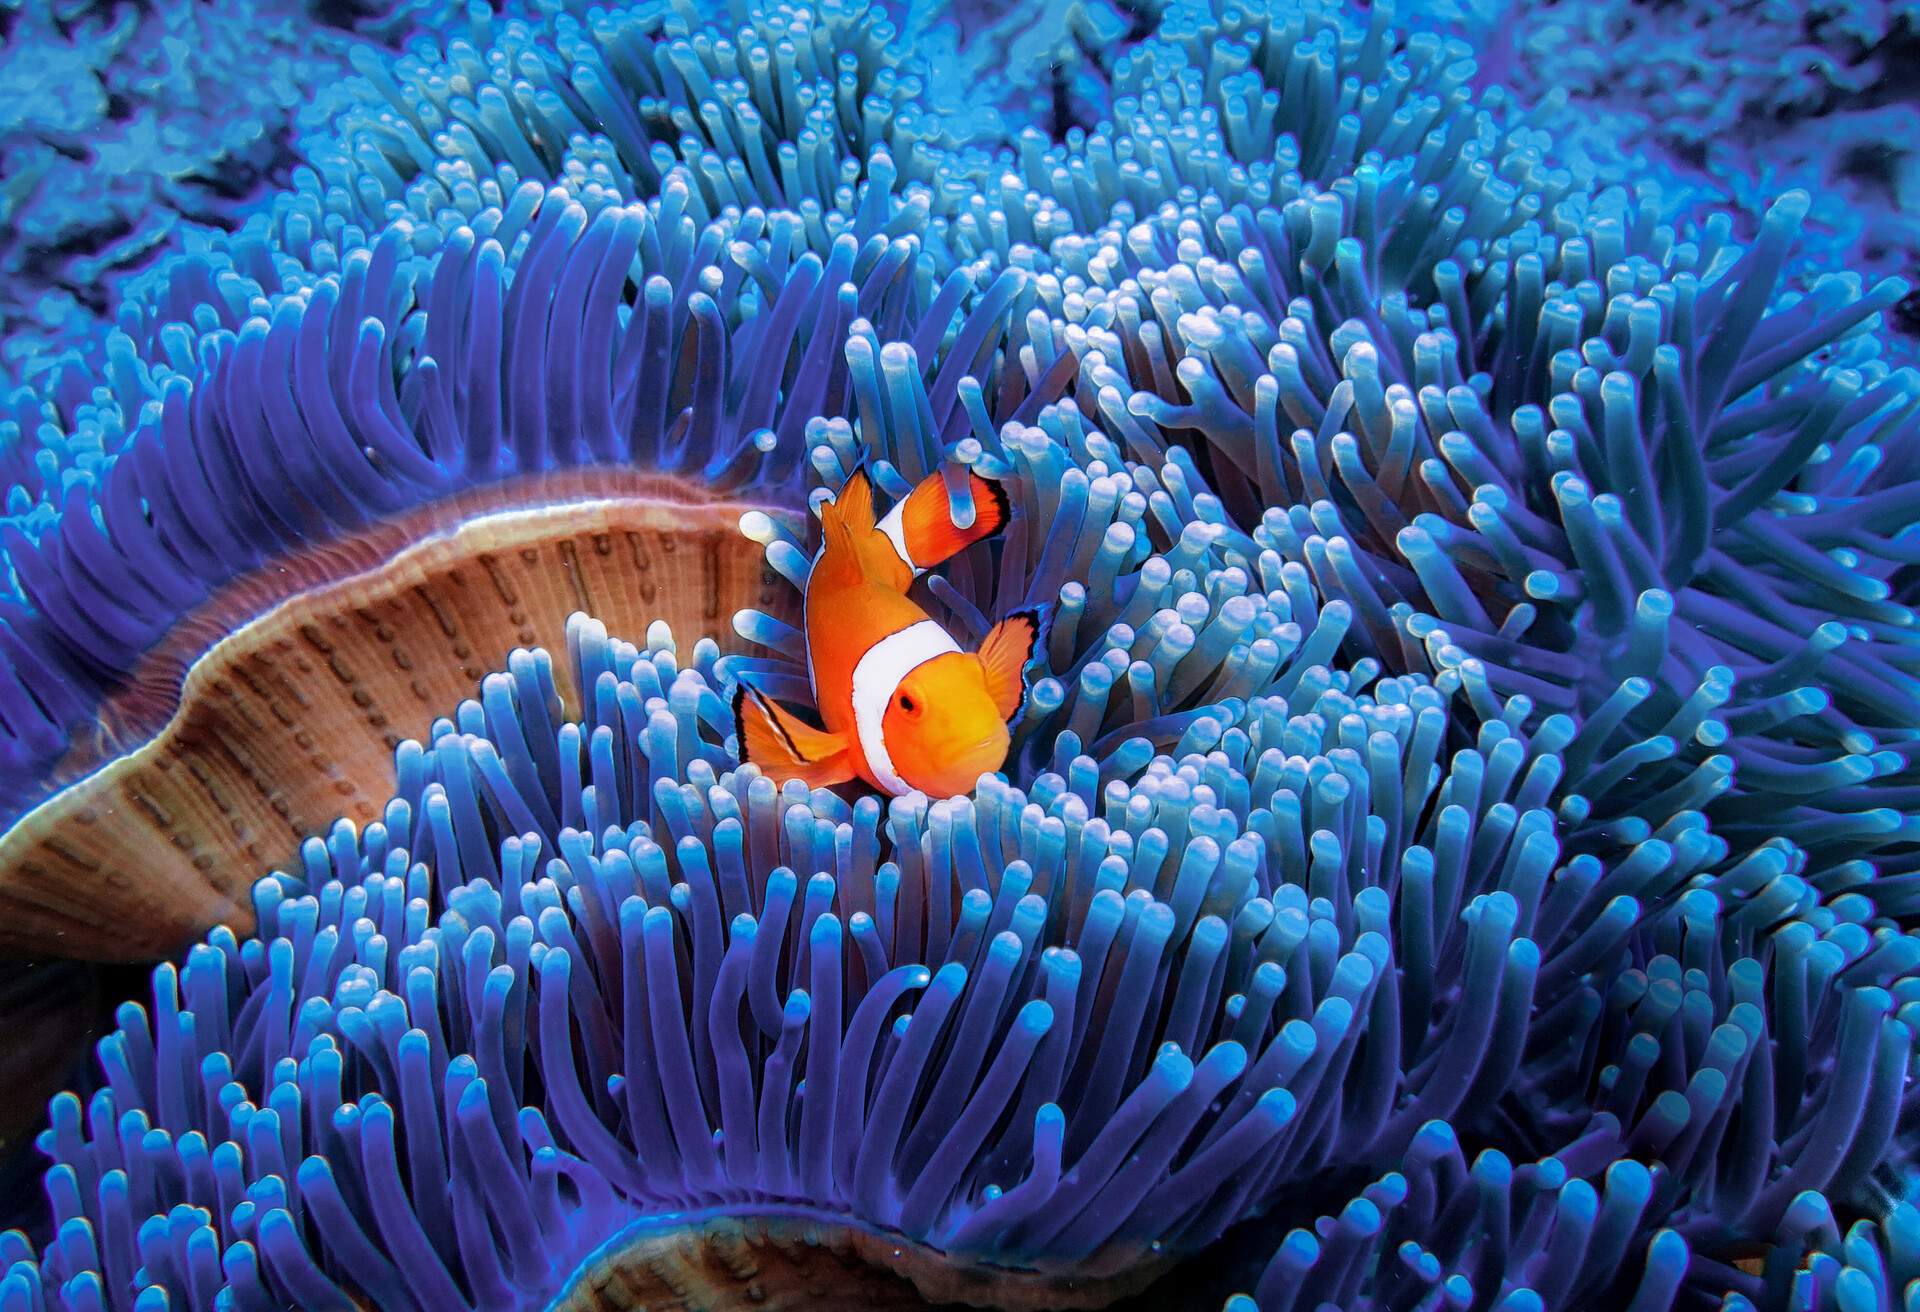 A playful clown-fish hiding in blue sea anemone and looking at the camera.